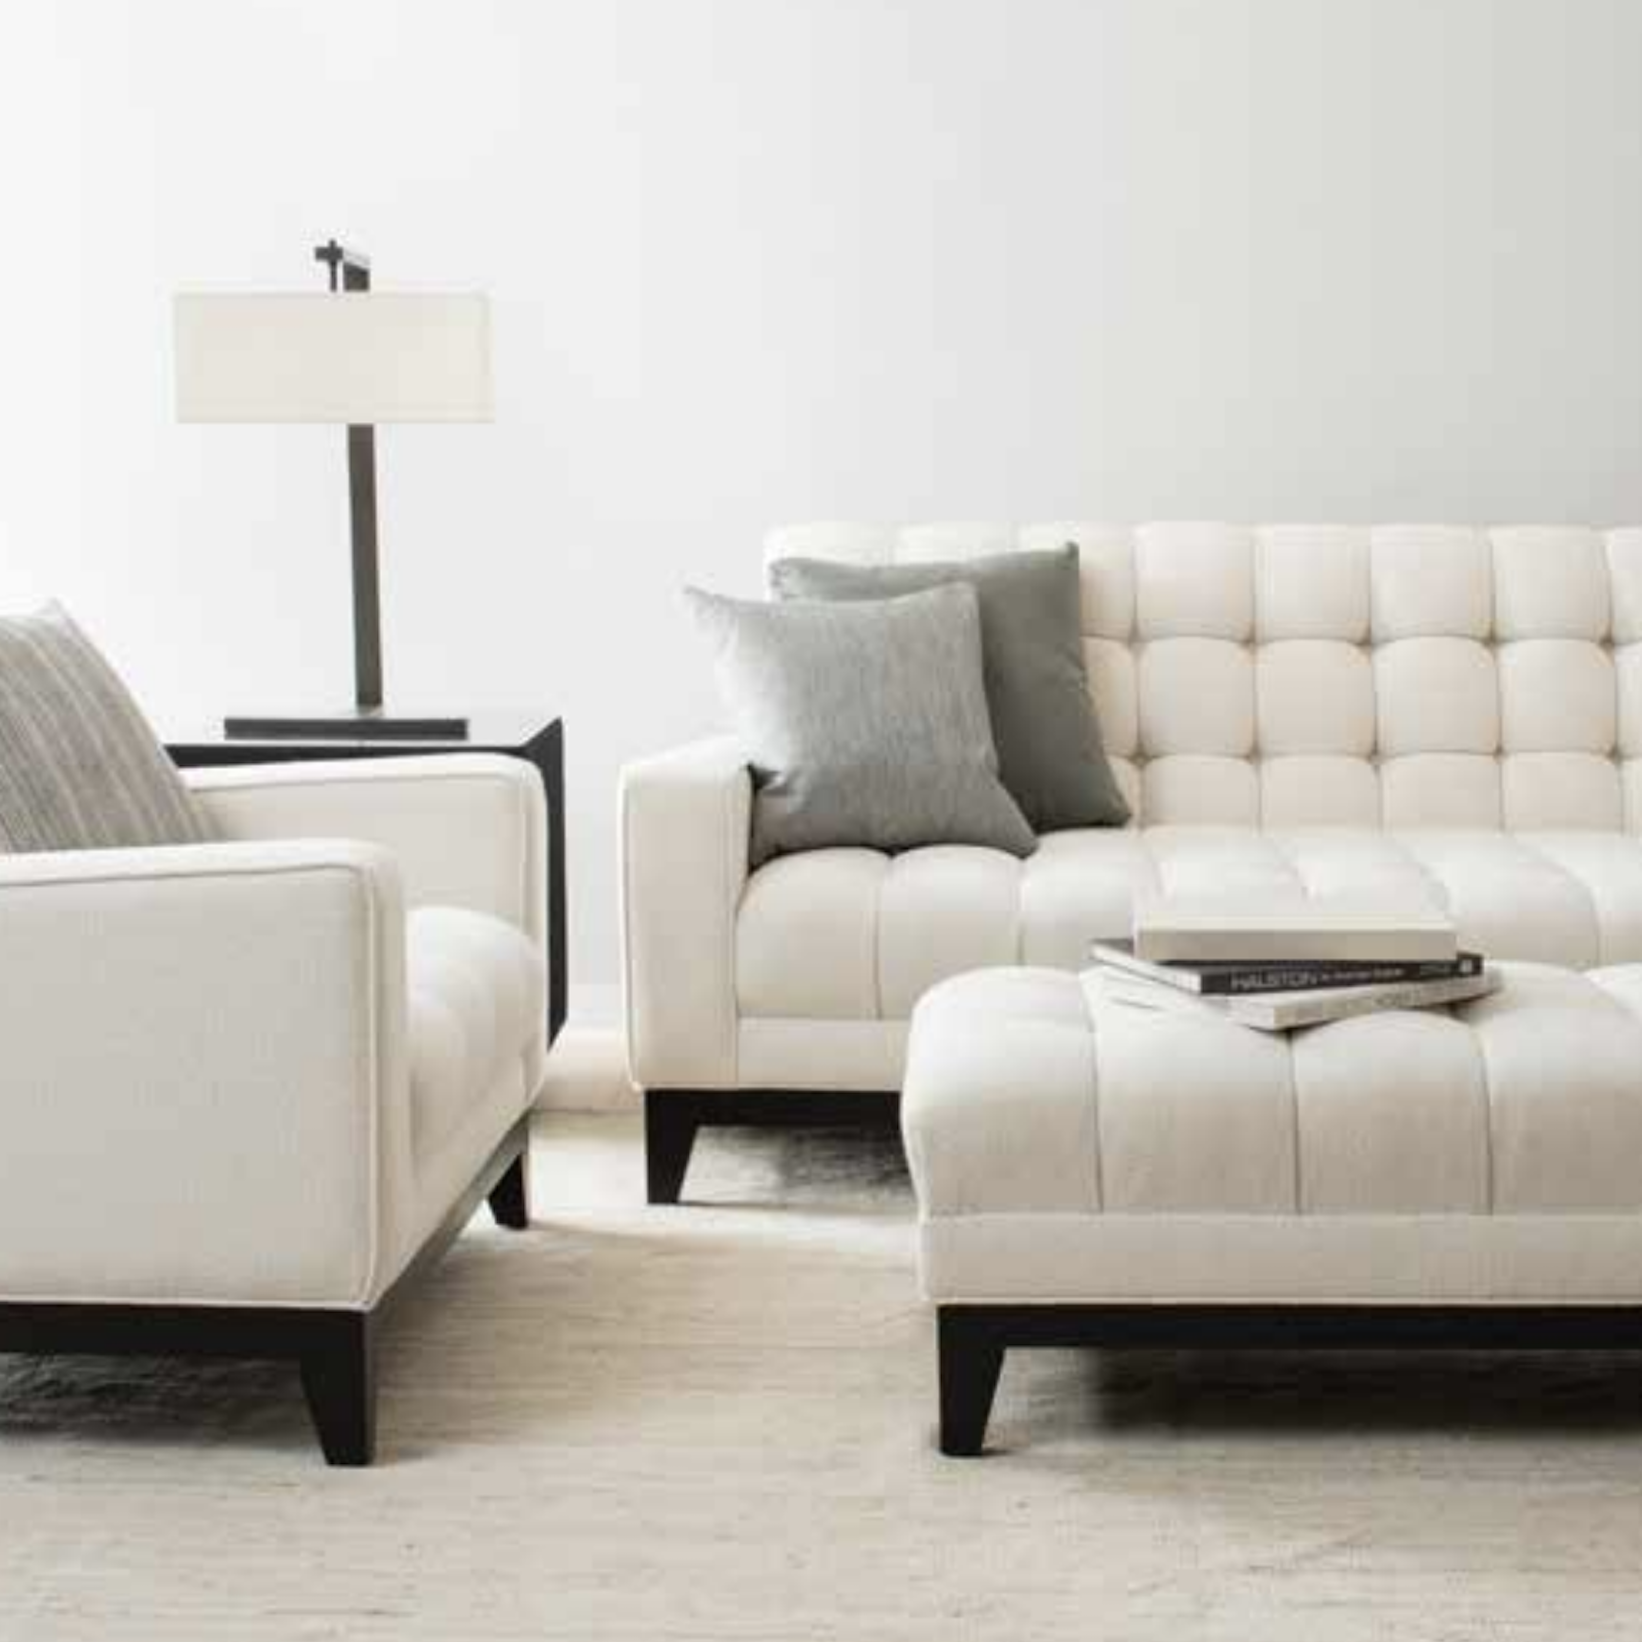 Image of Avery Boardman white tufted sofa and ottoman